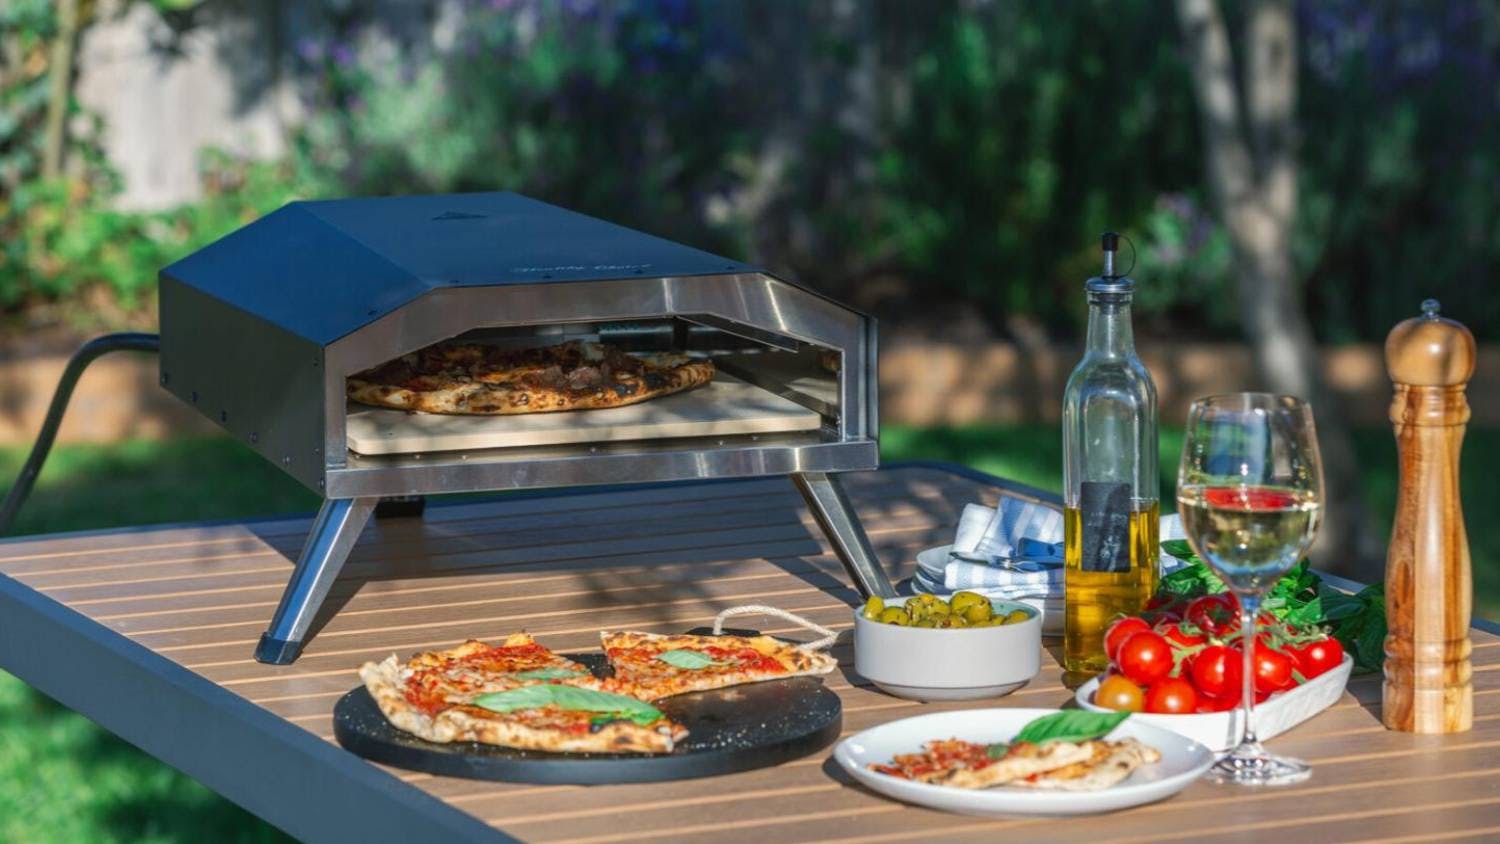 Healthy Choice Portable Gas-Powered Pizza Oven with Pizza Stone 33cm